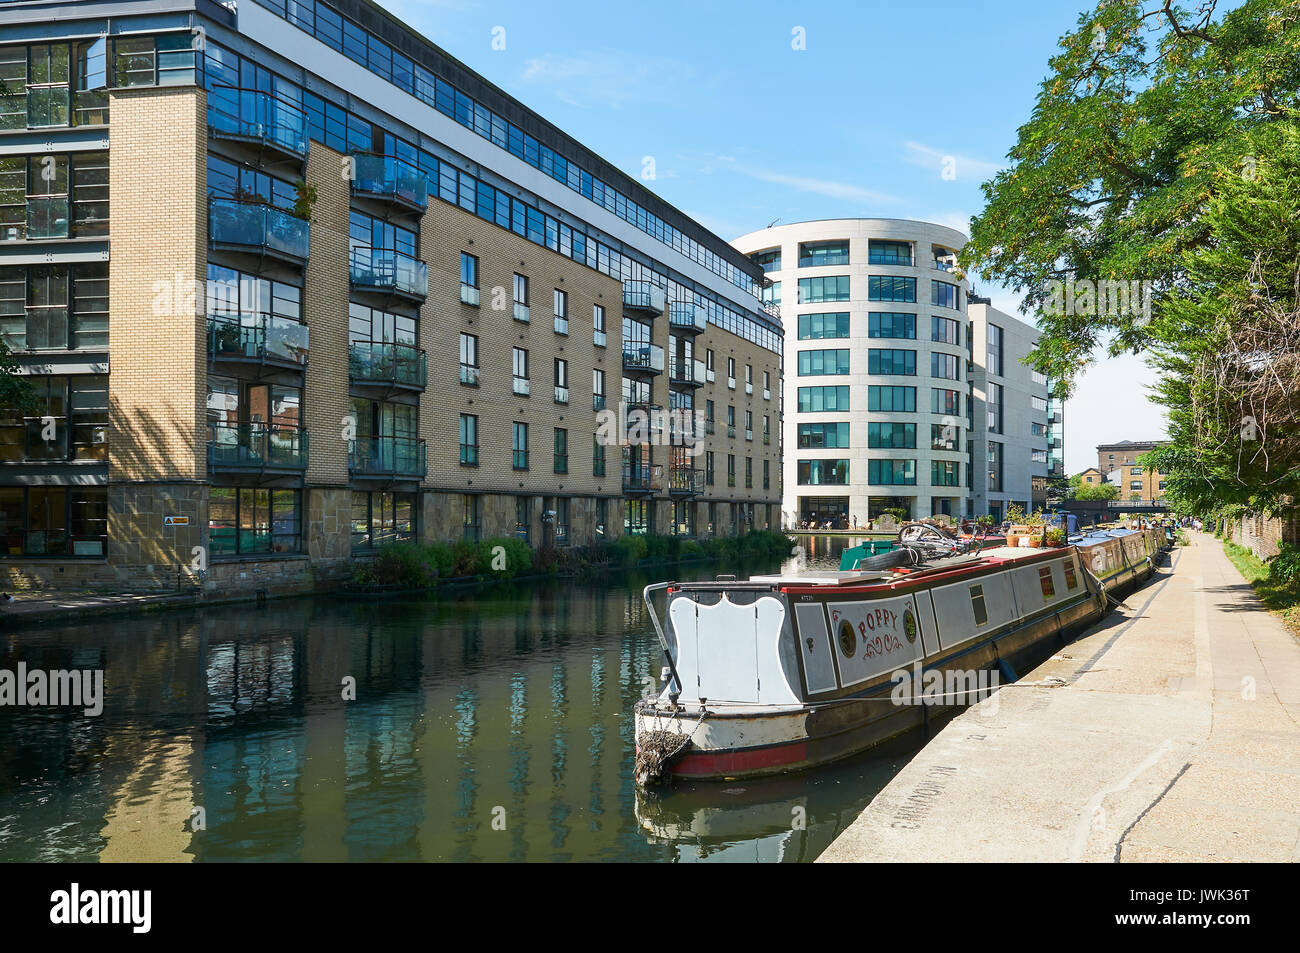 New buildings and narrowboats on the Regents Canal at Kings Cross, London UK Stock Photo